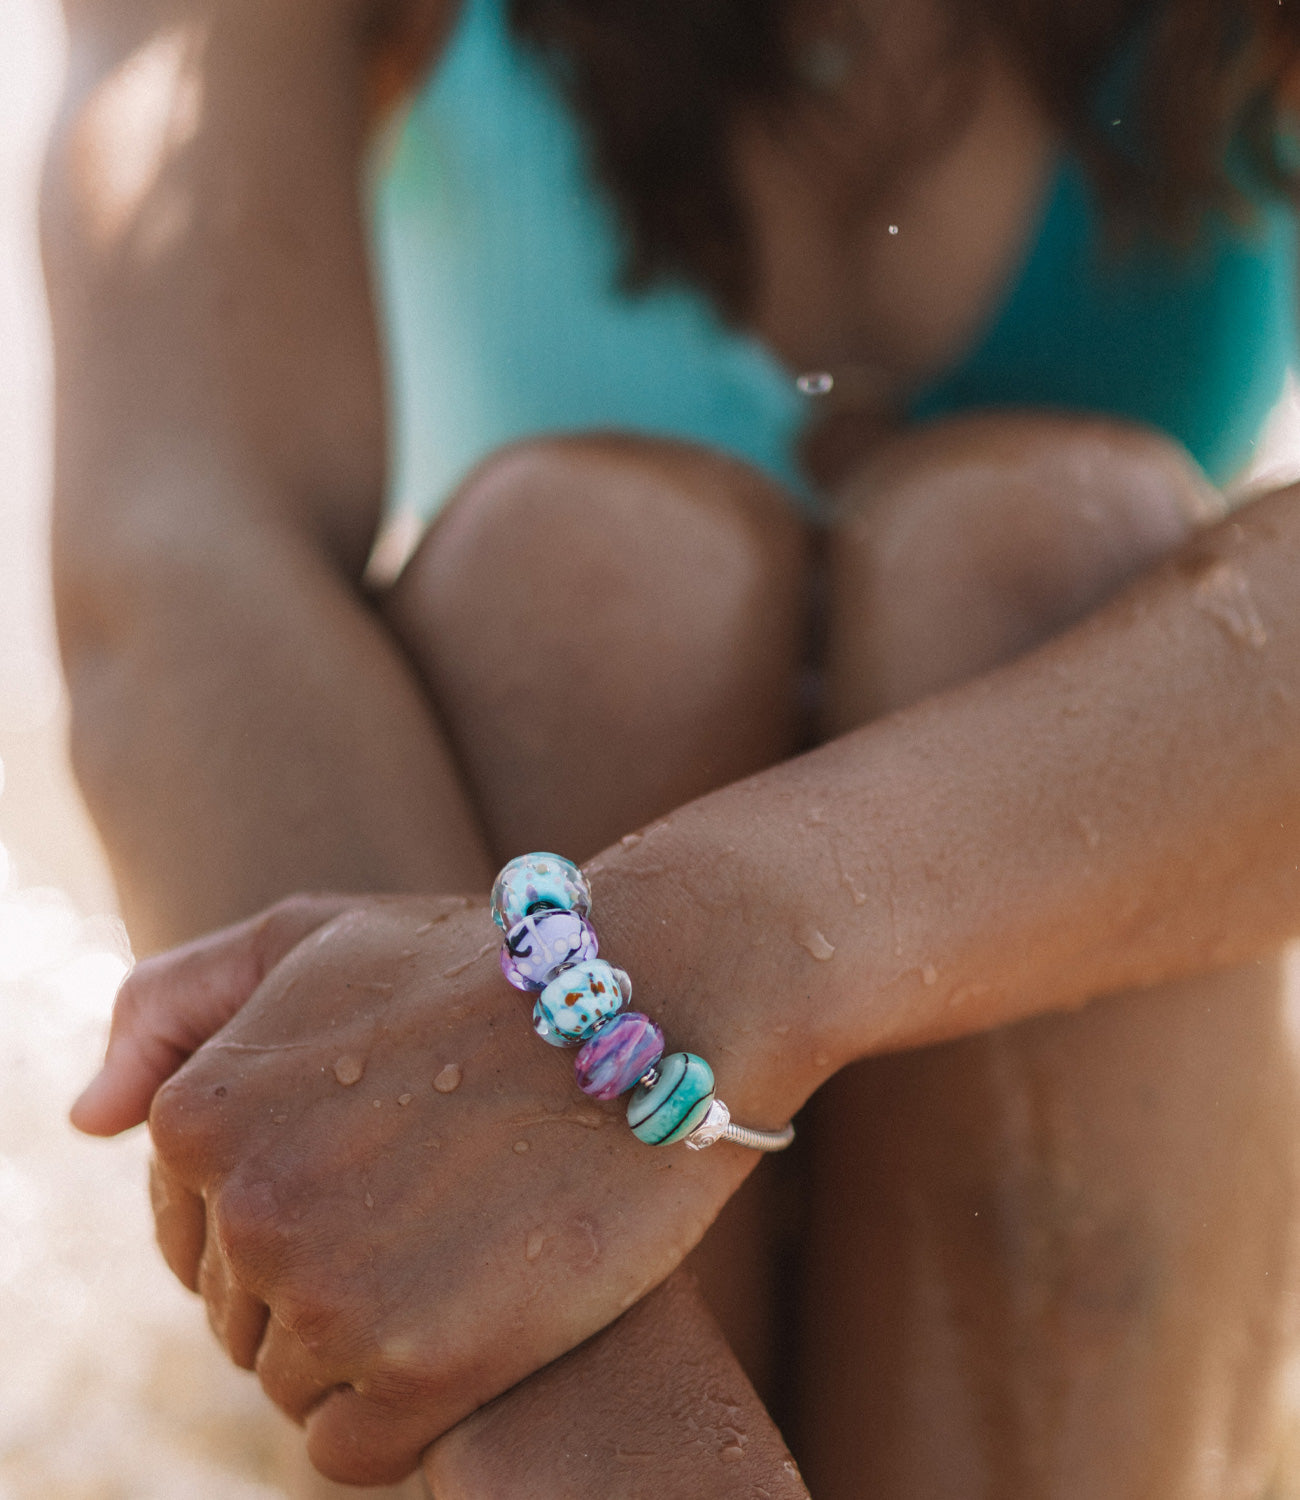 Green, blue and purple glass beads worn on silver snake chain bracelet by surfer girl at beach in teal bikini.